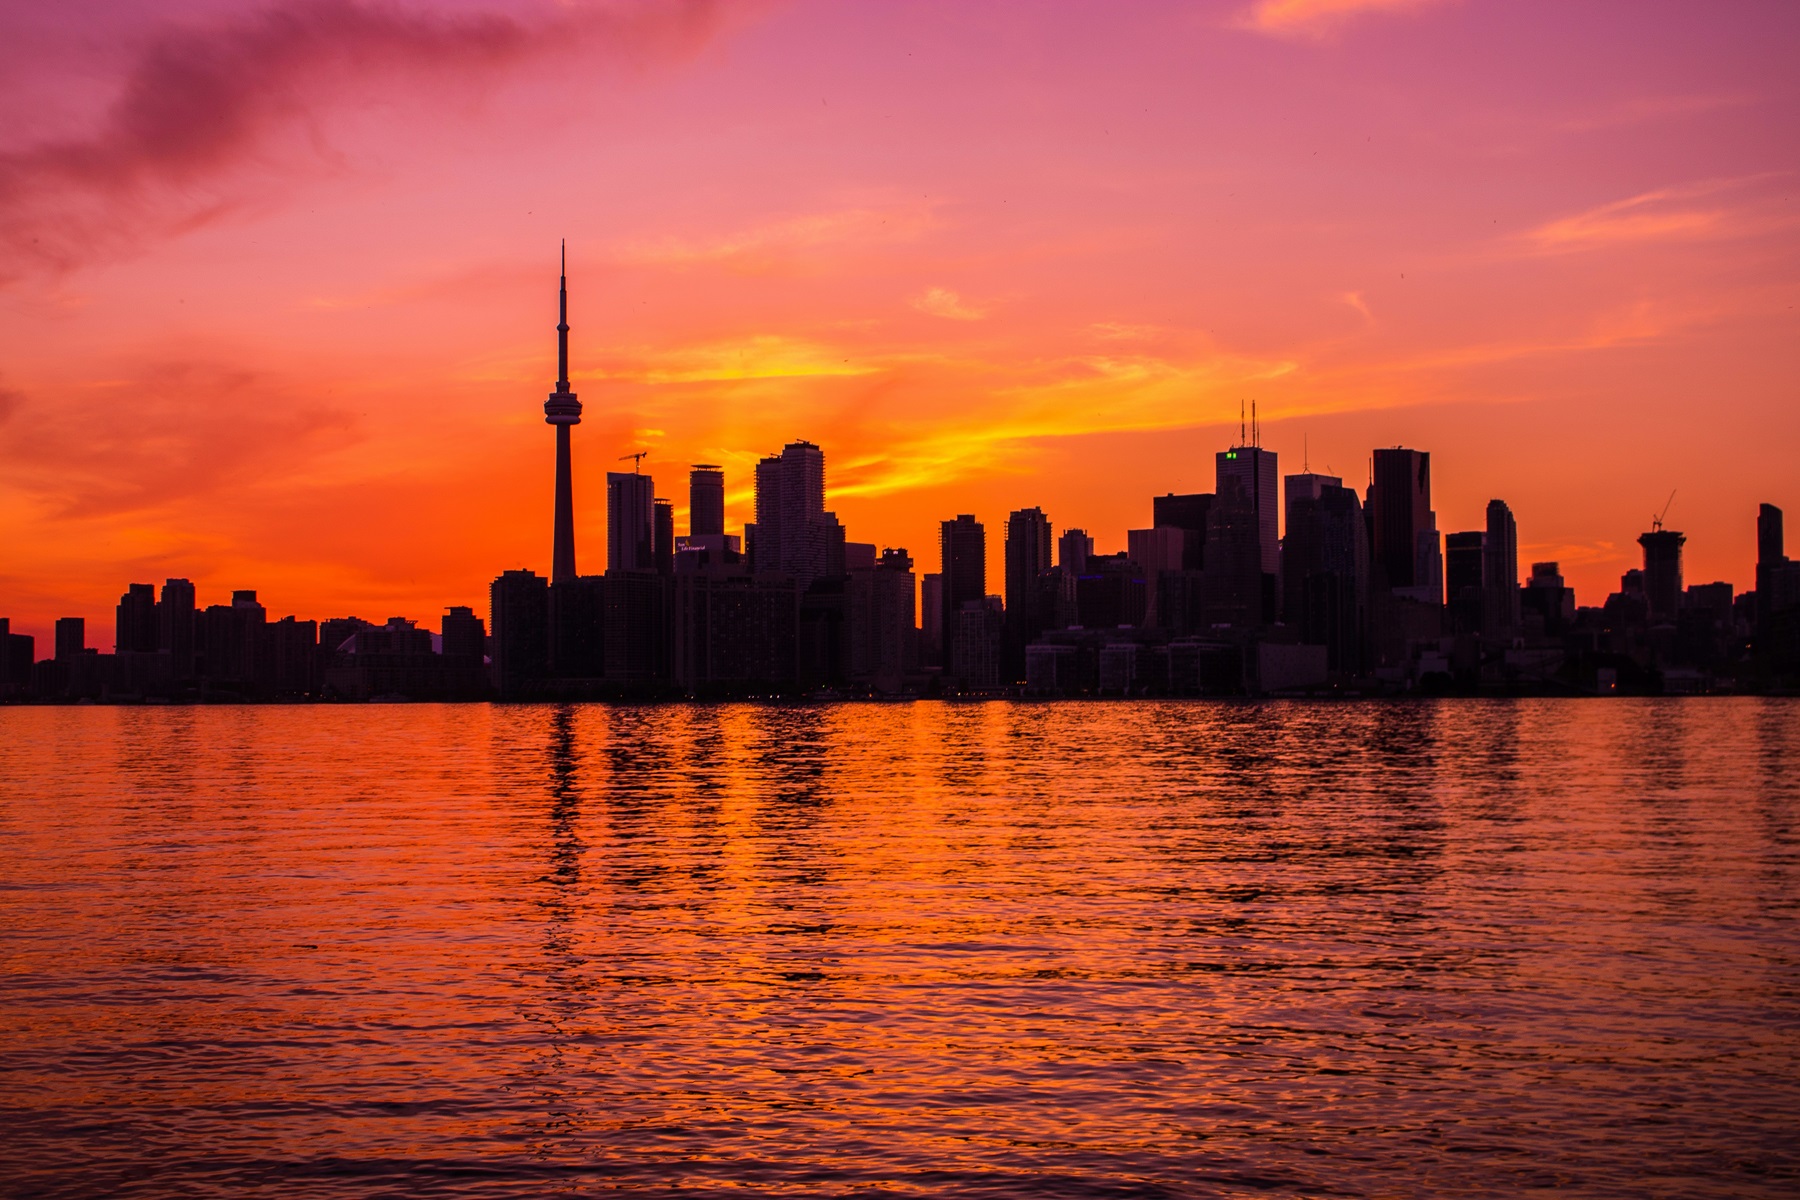 Toronto skyline with a red sunset